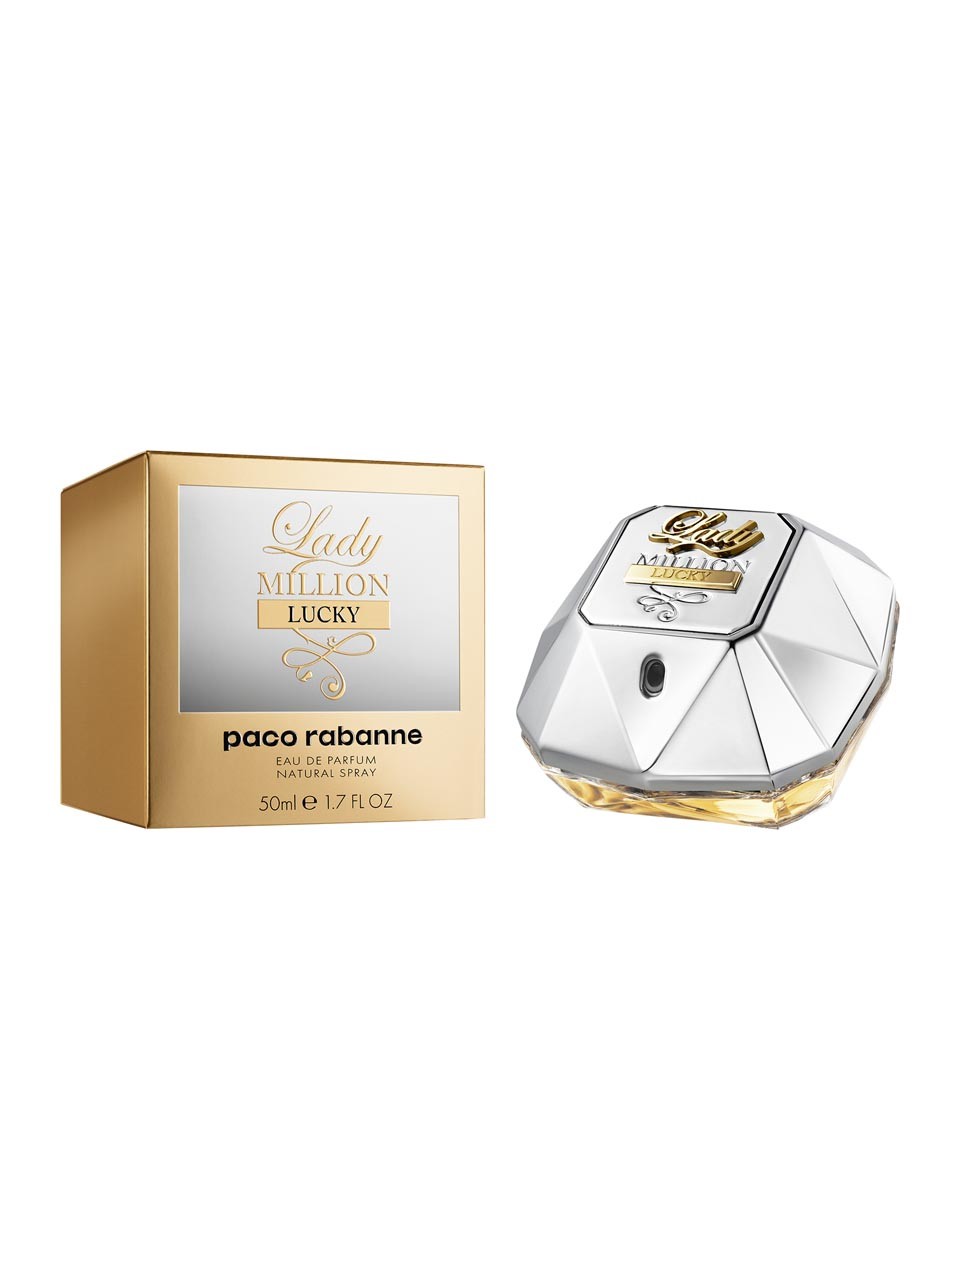 Lady Million Lucky Paco Rabanne perfume - a new fragrance for women 2018